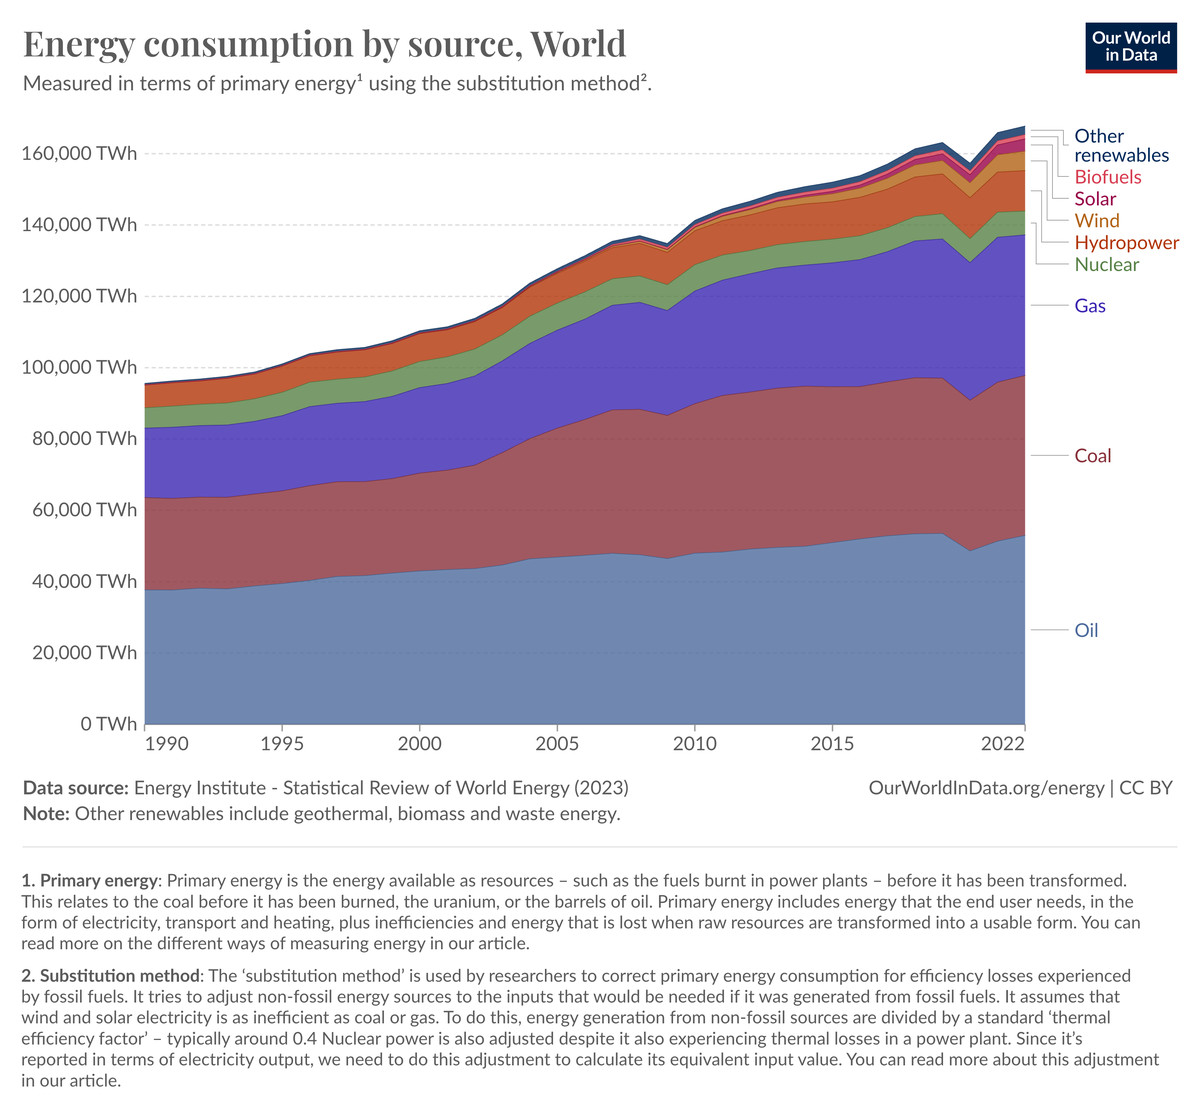 Graph of global energy sources over time